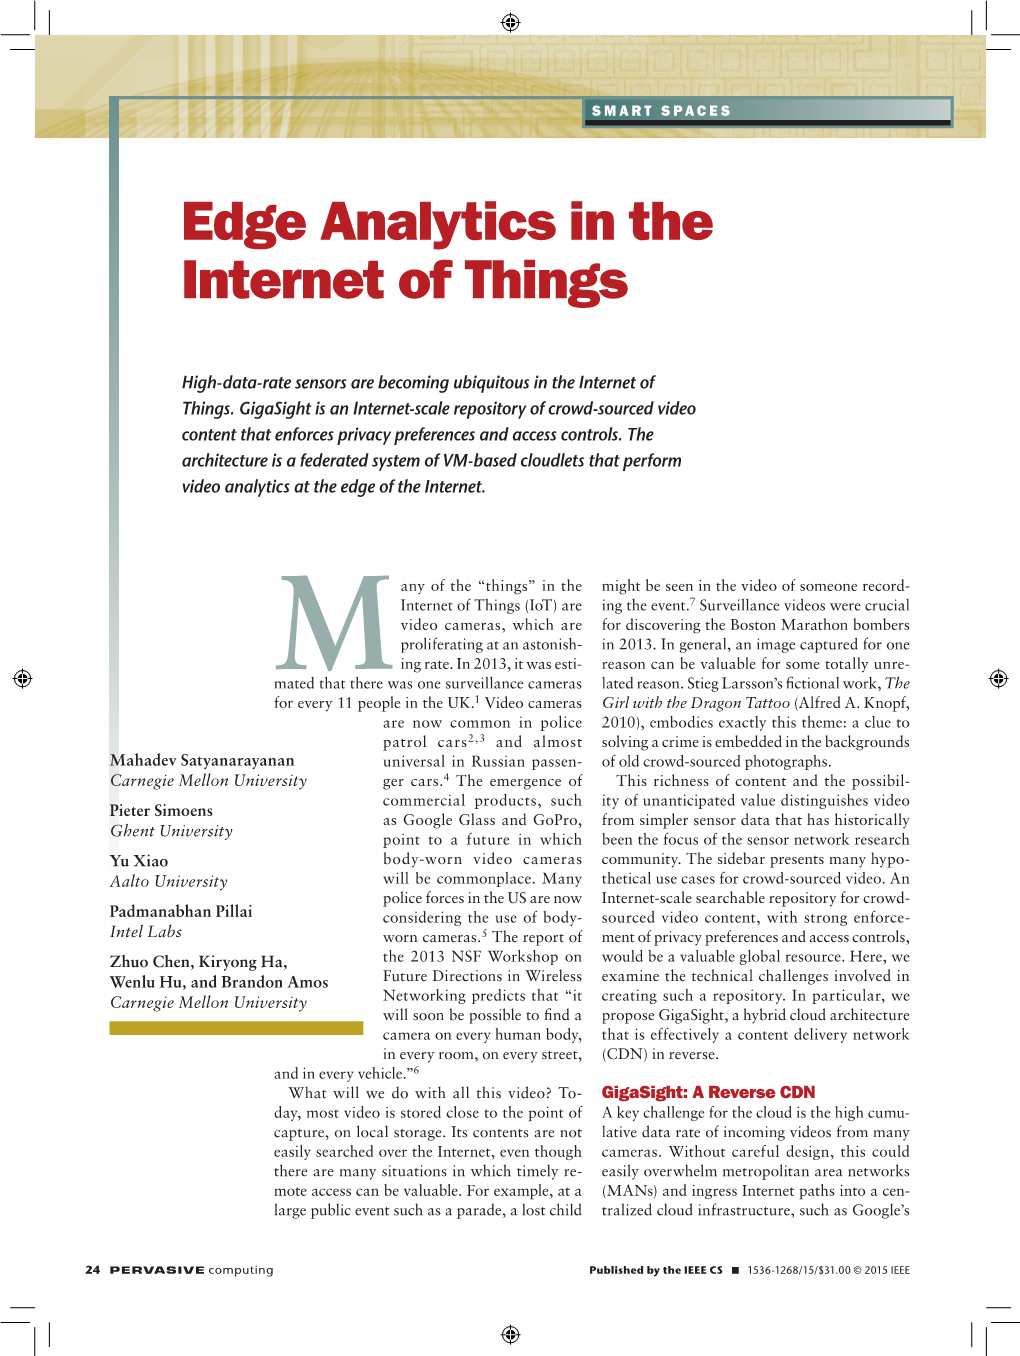 Edge Analytics in the Internet of Things